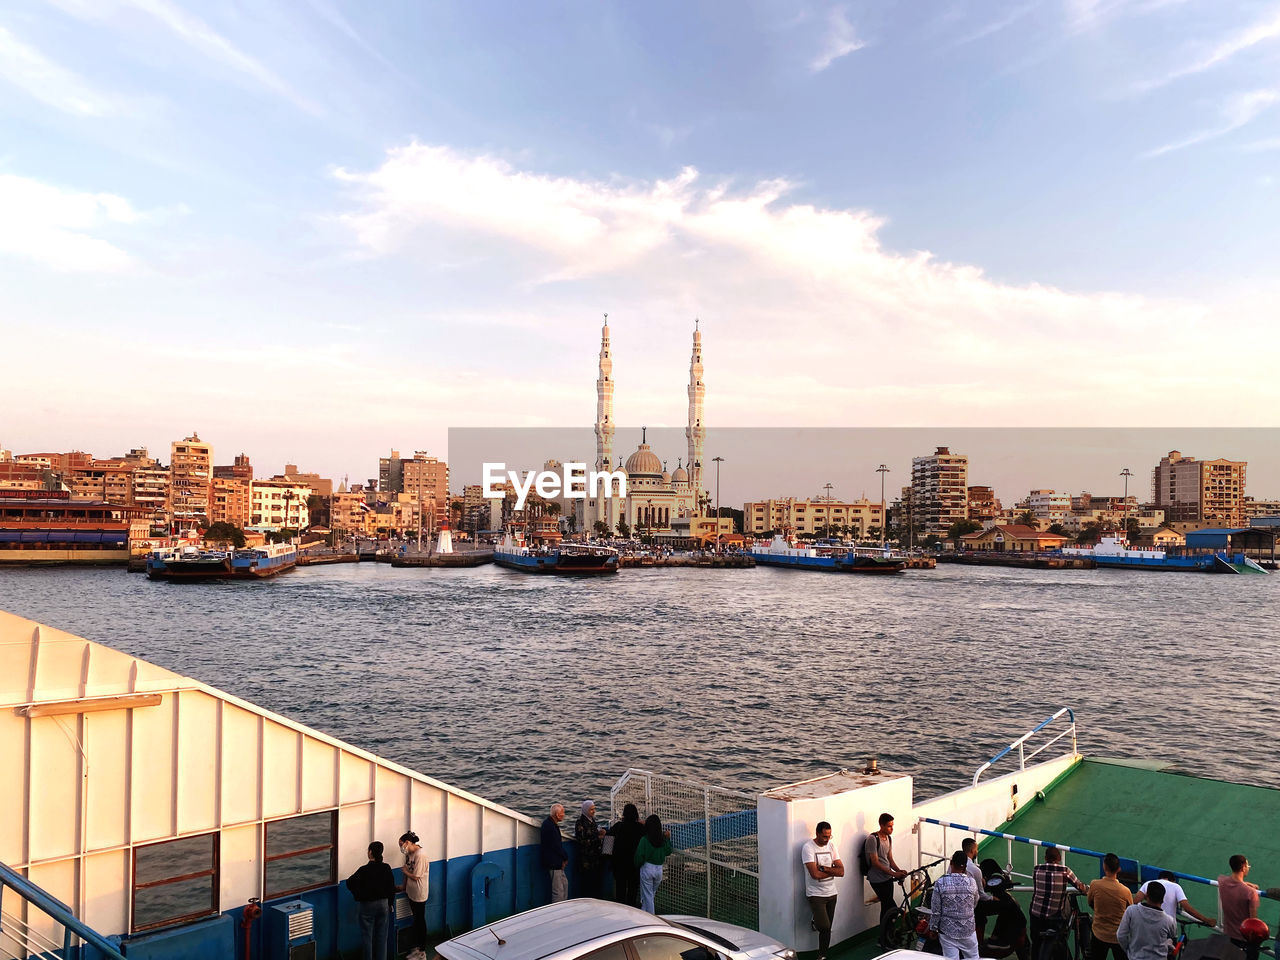 From port said to port foad, a ferry tale